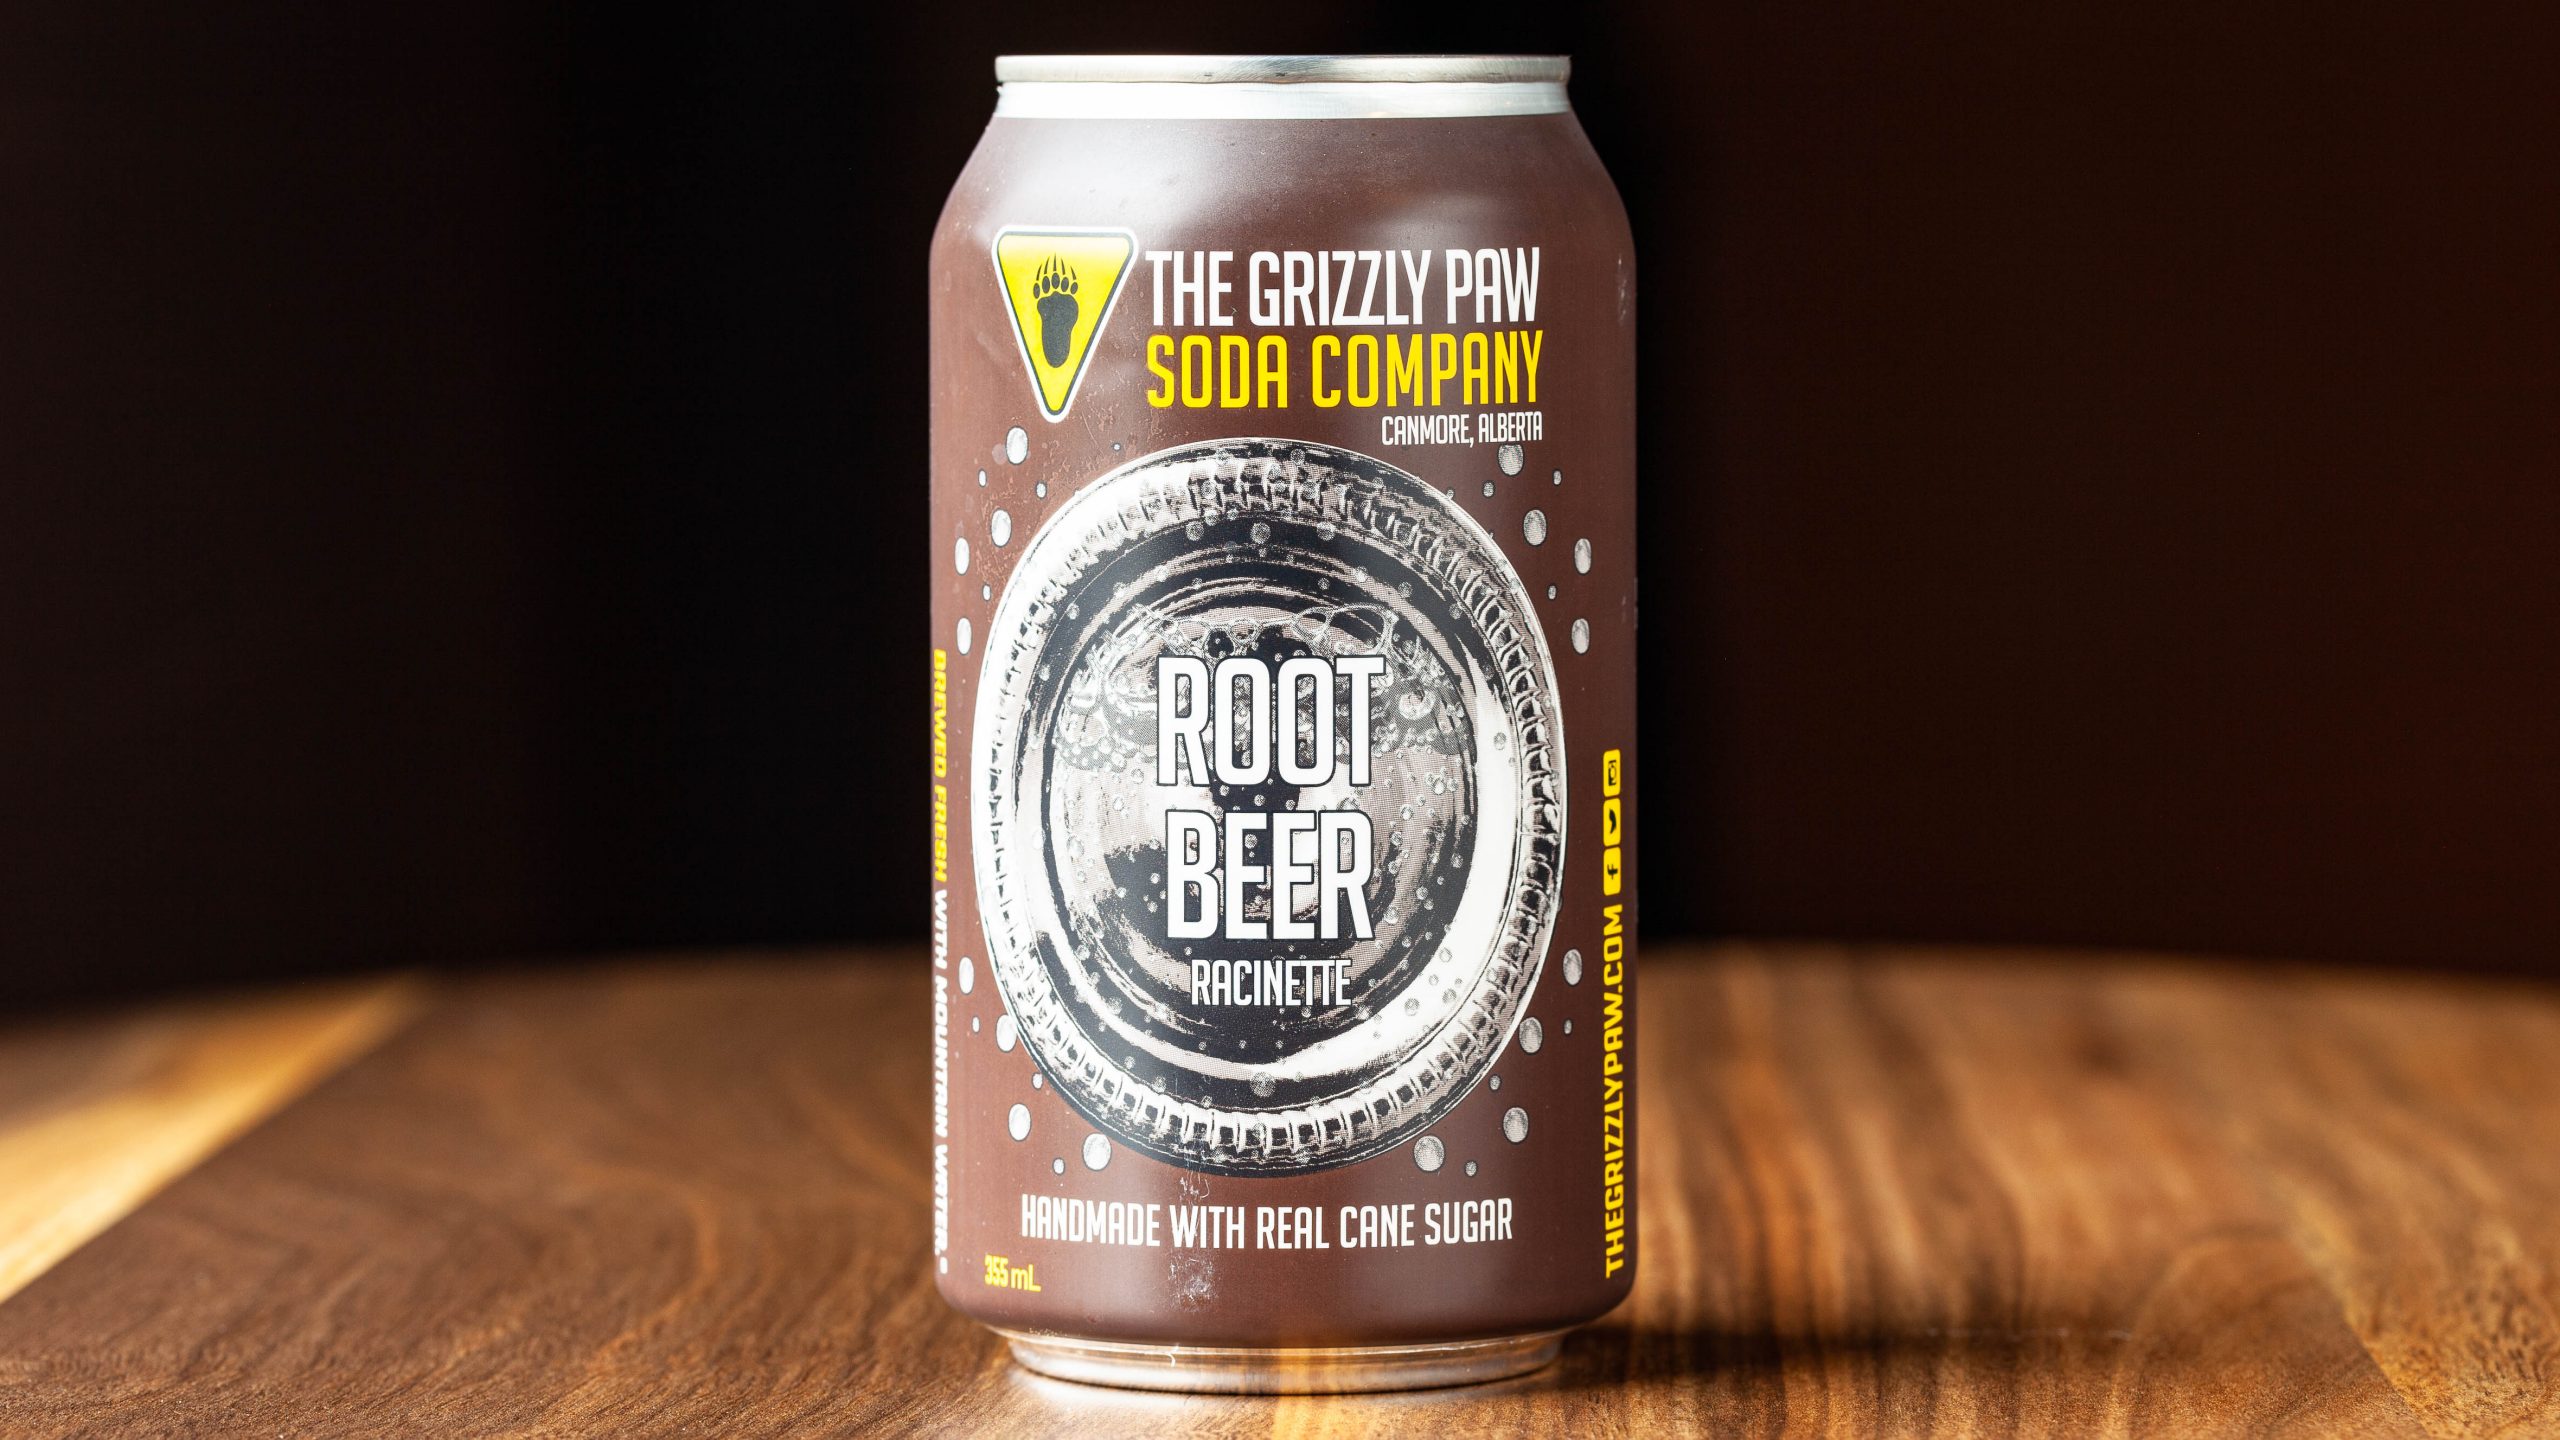 A 355-mL can of Grizzly Paw Root Beer, made locally in Canmore, Alberta.